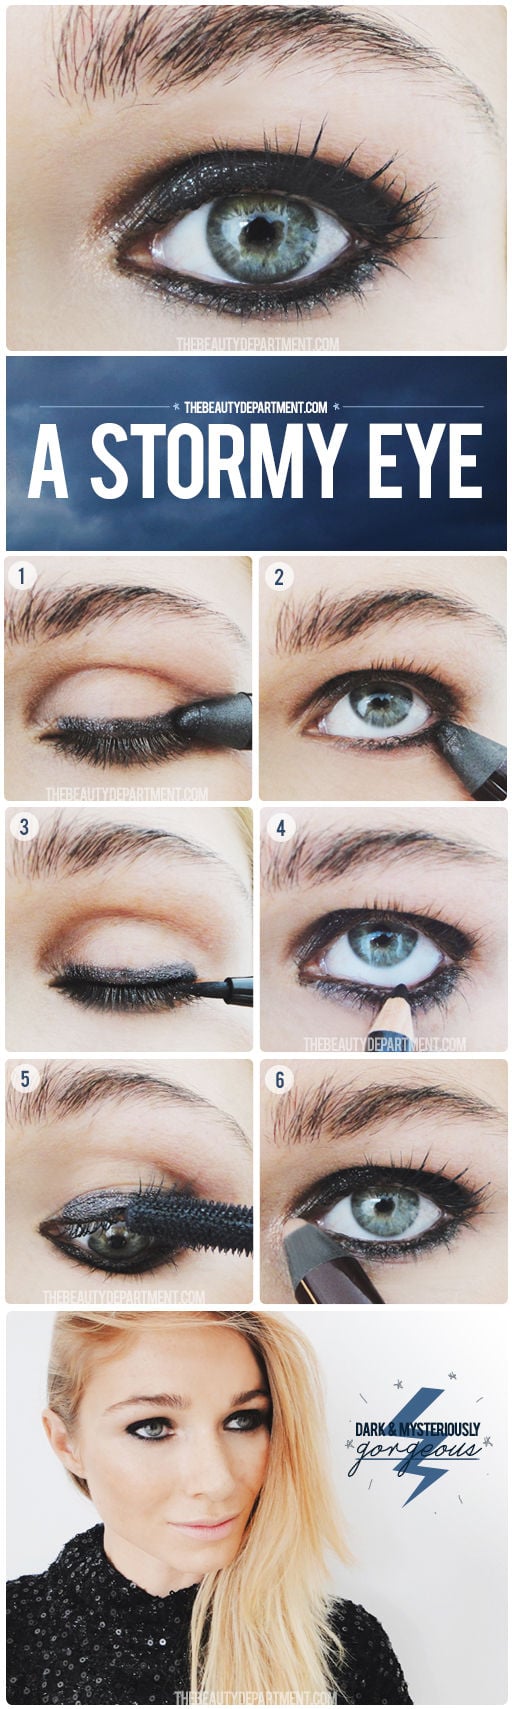 The Hottest Makeup Trends 20 Great Tips, Tricks and Tutorials (14)